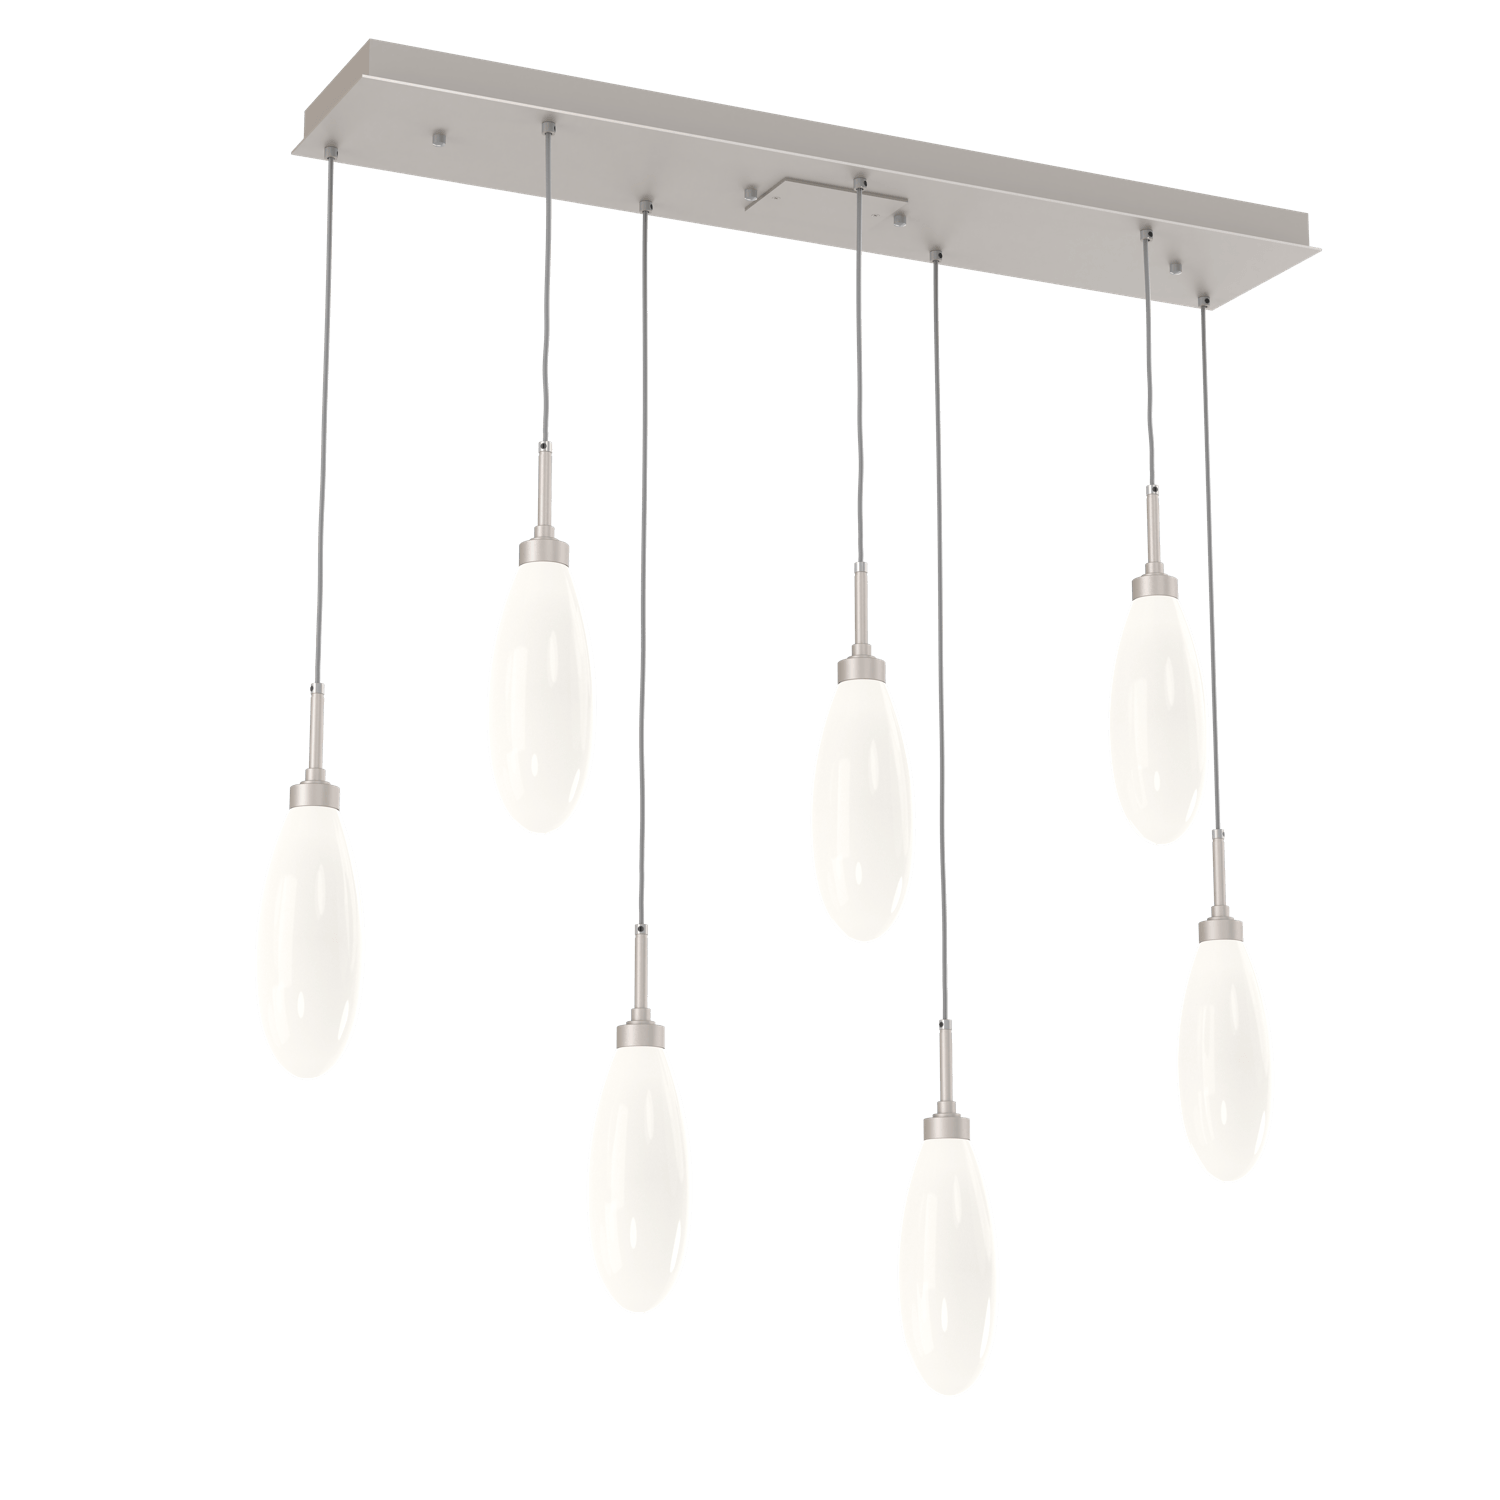 PLB0071-07-BS-WL-LL-Hammerton-Studio-Fiori-7-light-linear-pendant-chandelier-with-metallic-beige-silver-finish-and-opal-white-glass-shades-and-LED-lamping